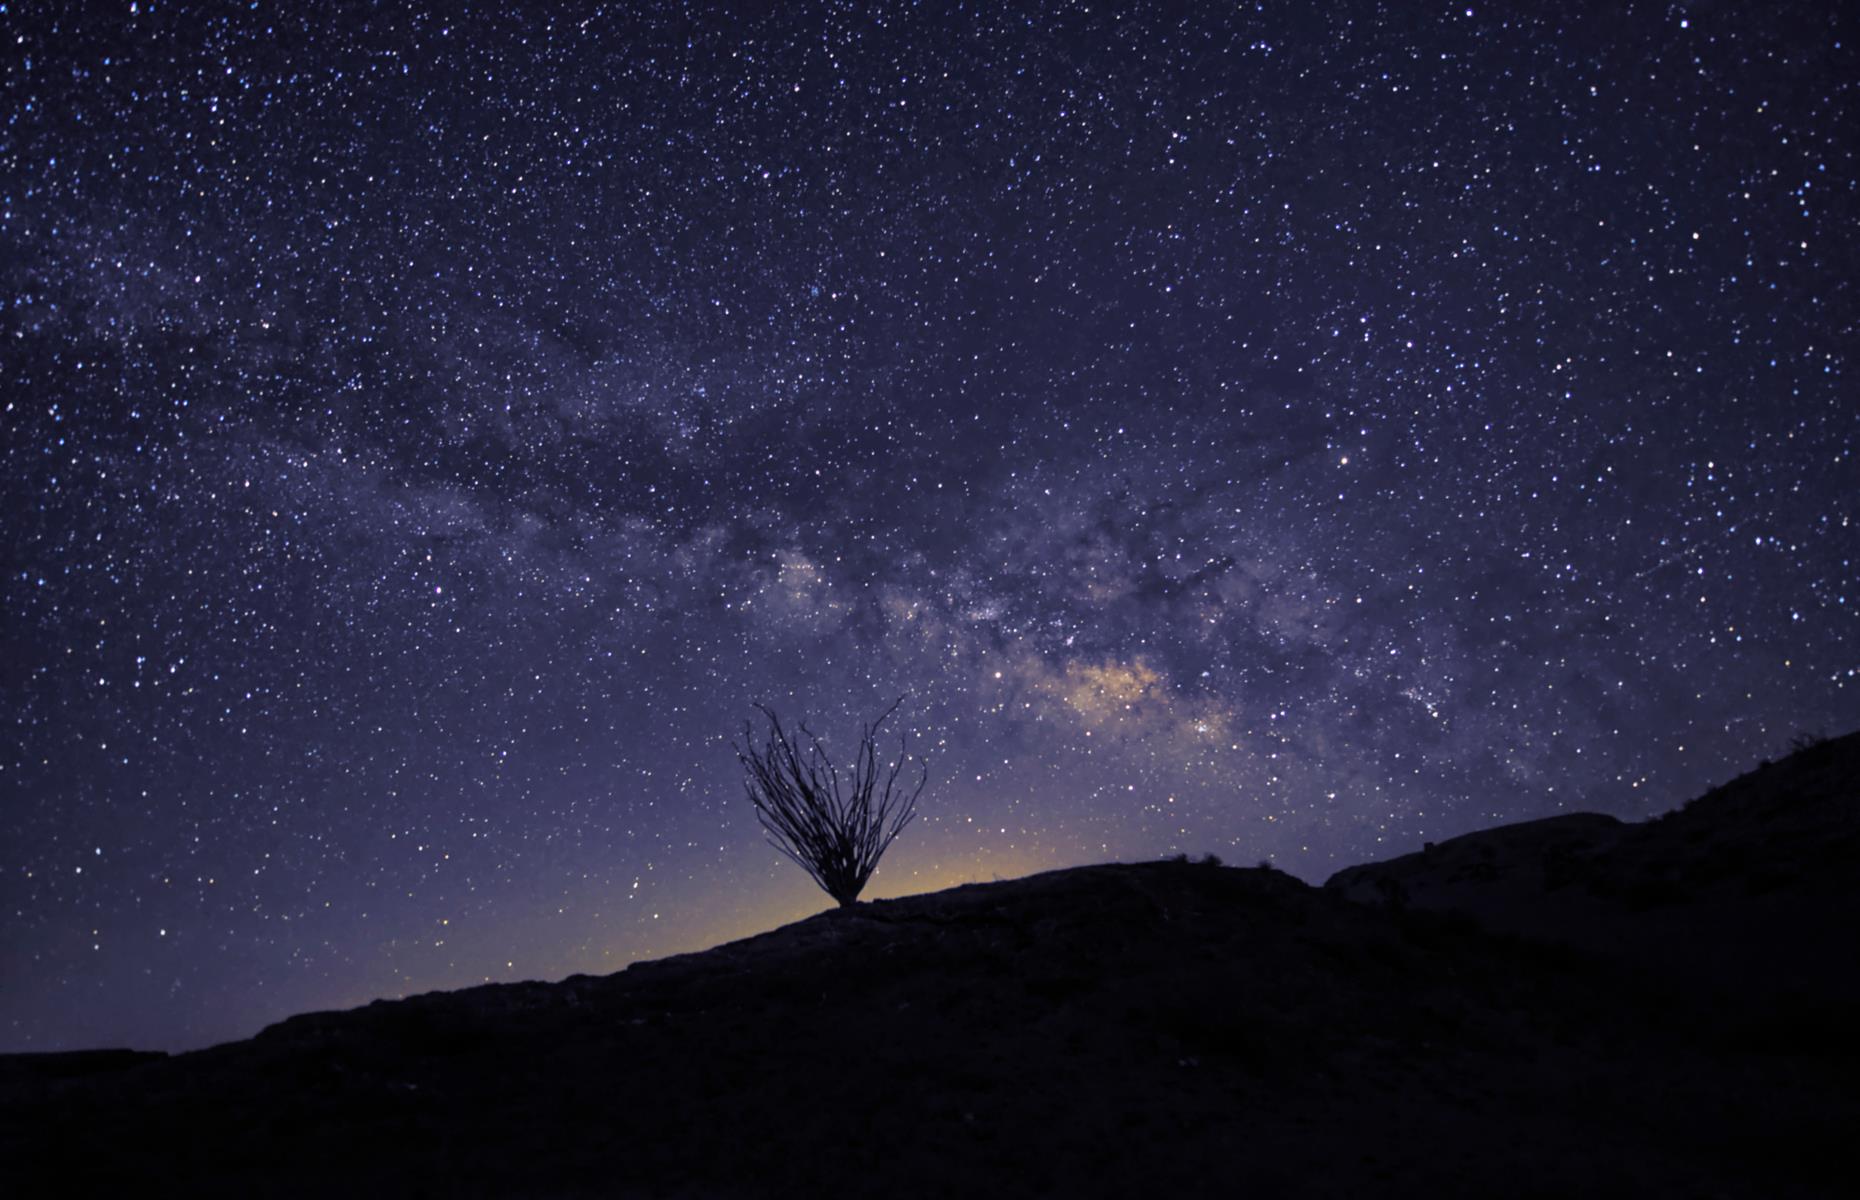 <p>Back to the Golden State – although that nickname isn't apt in the case of Anza-Borrego's densely dark skies. Given the subtlety of streetlights in nearby Borrego Springs, it was the first place in California to join the International Dark Sky Community. Local accommodations, such as <a href="http://www.springsatborrego.com/">The Springs at Borrego RV Resort and Golf Course</a>, with its 11-inch diameter telescope, make the most of the clear nights, and Dark Sky Week typically takes place in April too.</p>